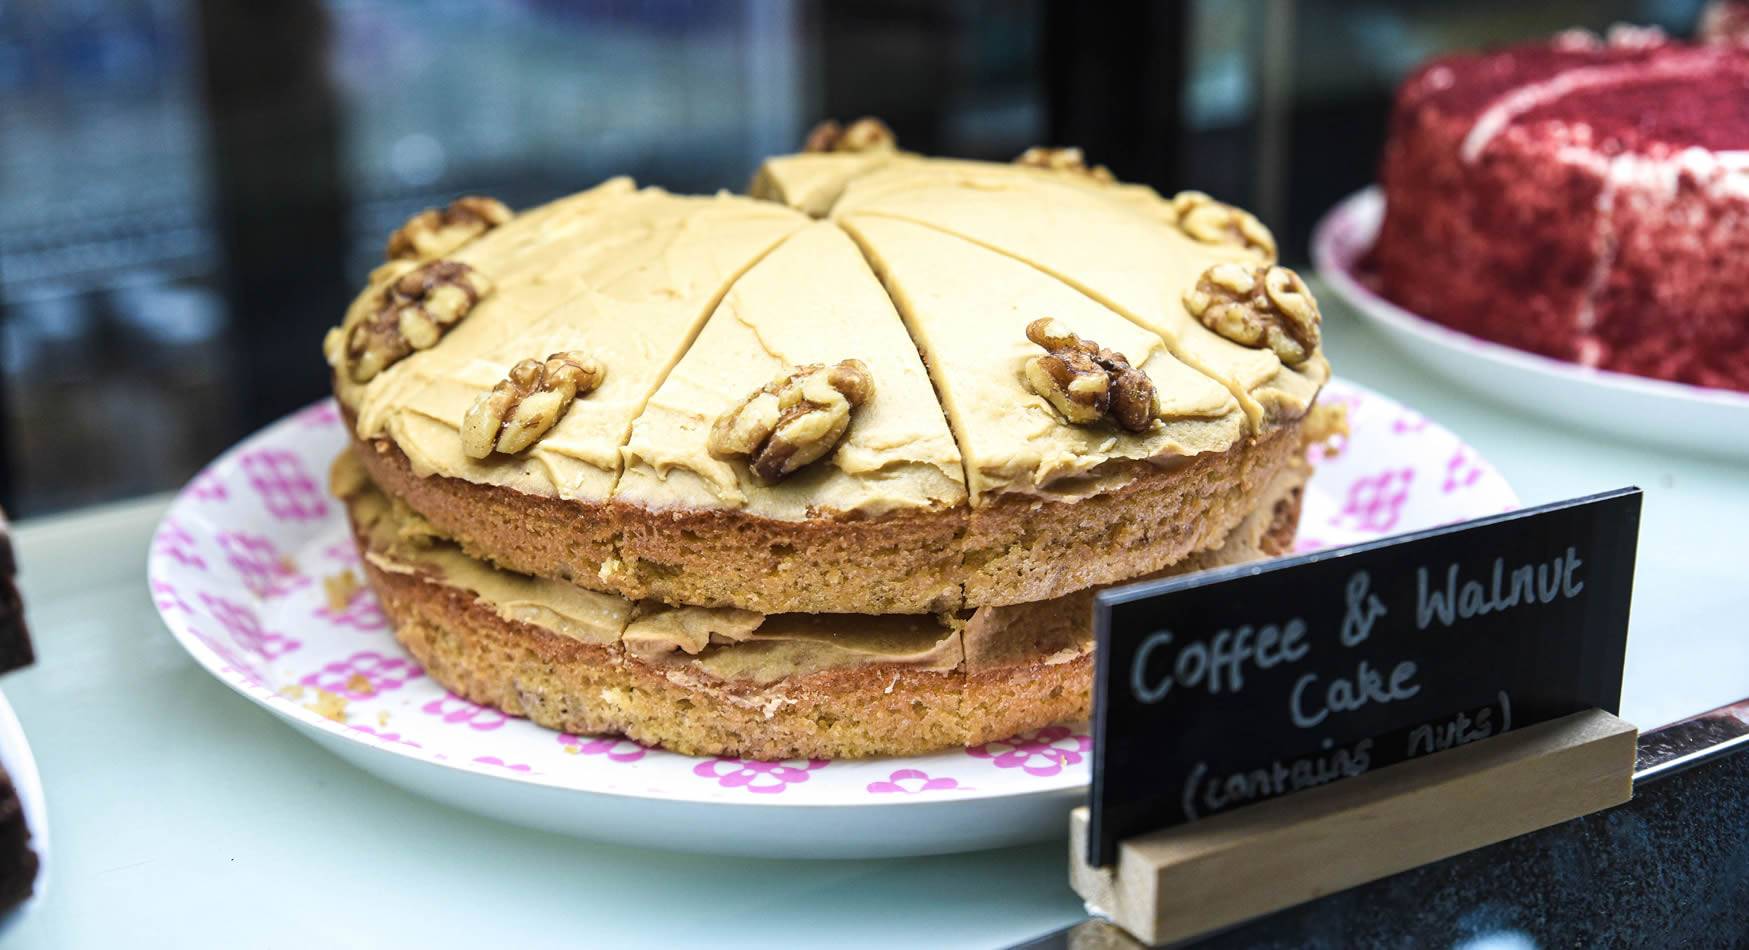 We always offer a great choice of homemade cakes, traybakes, scones and our famous bread pudding!